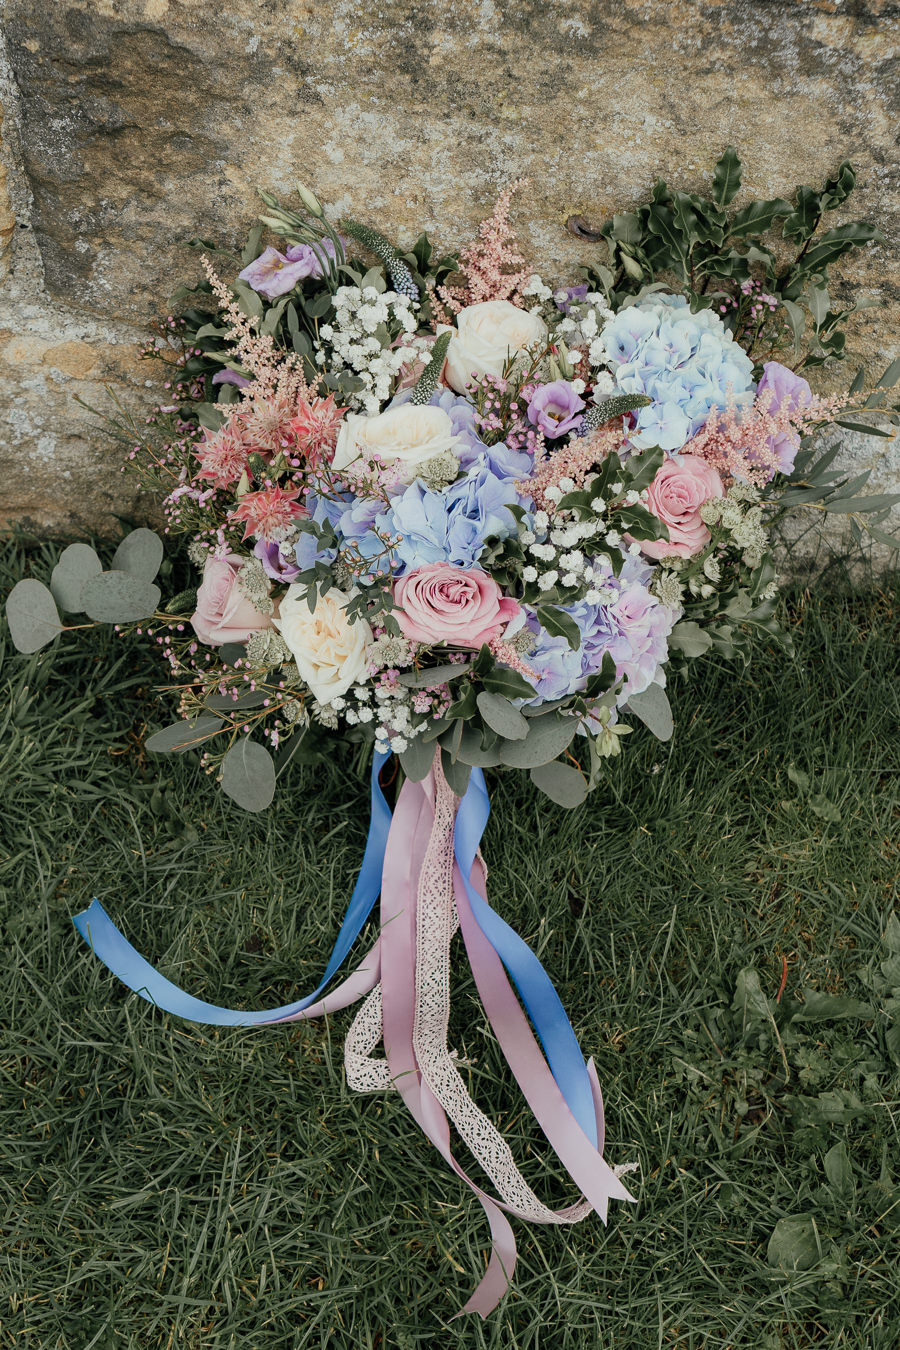 Rural English wedding style at Danby Castle, photo credit Rosanna Lilly Photography (19)